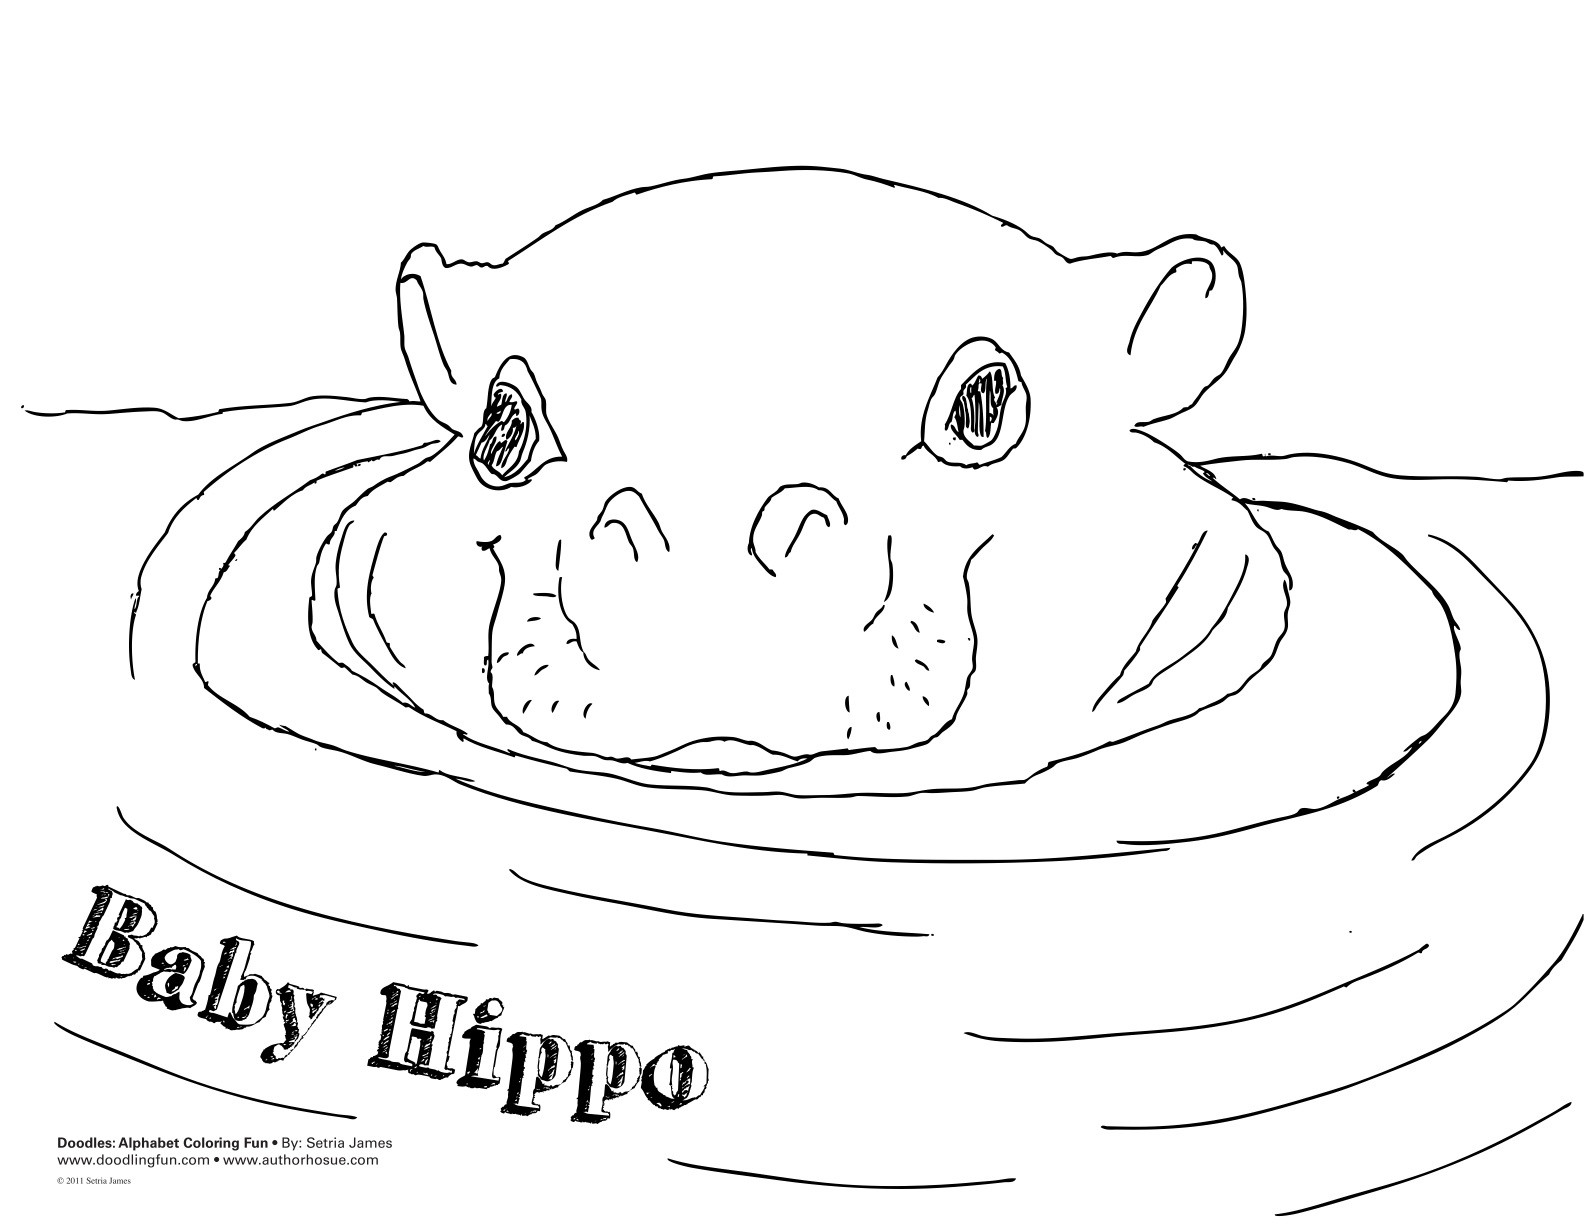 Baby Hippo Coloring Pages
 A Baby Pygmy Hippopotamus Coloring Sheet